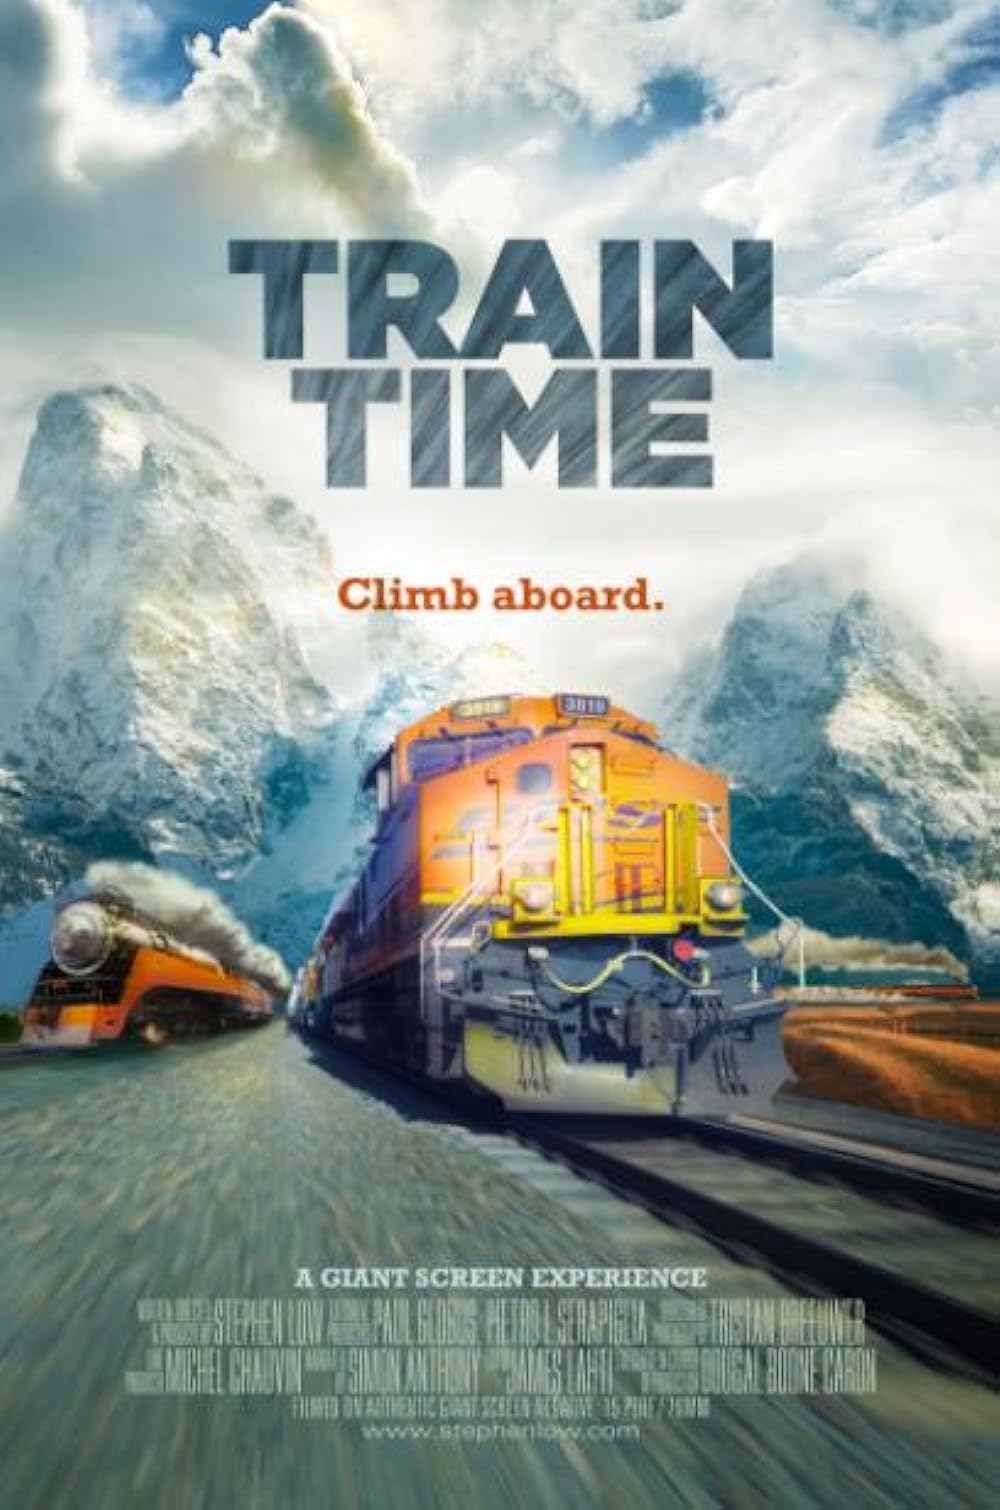 Film poster for the large format film, Train Time